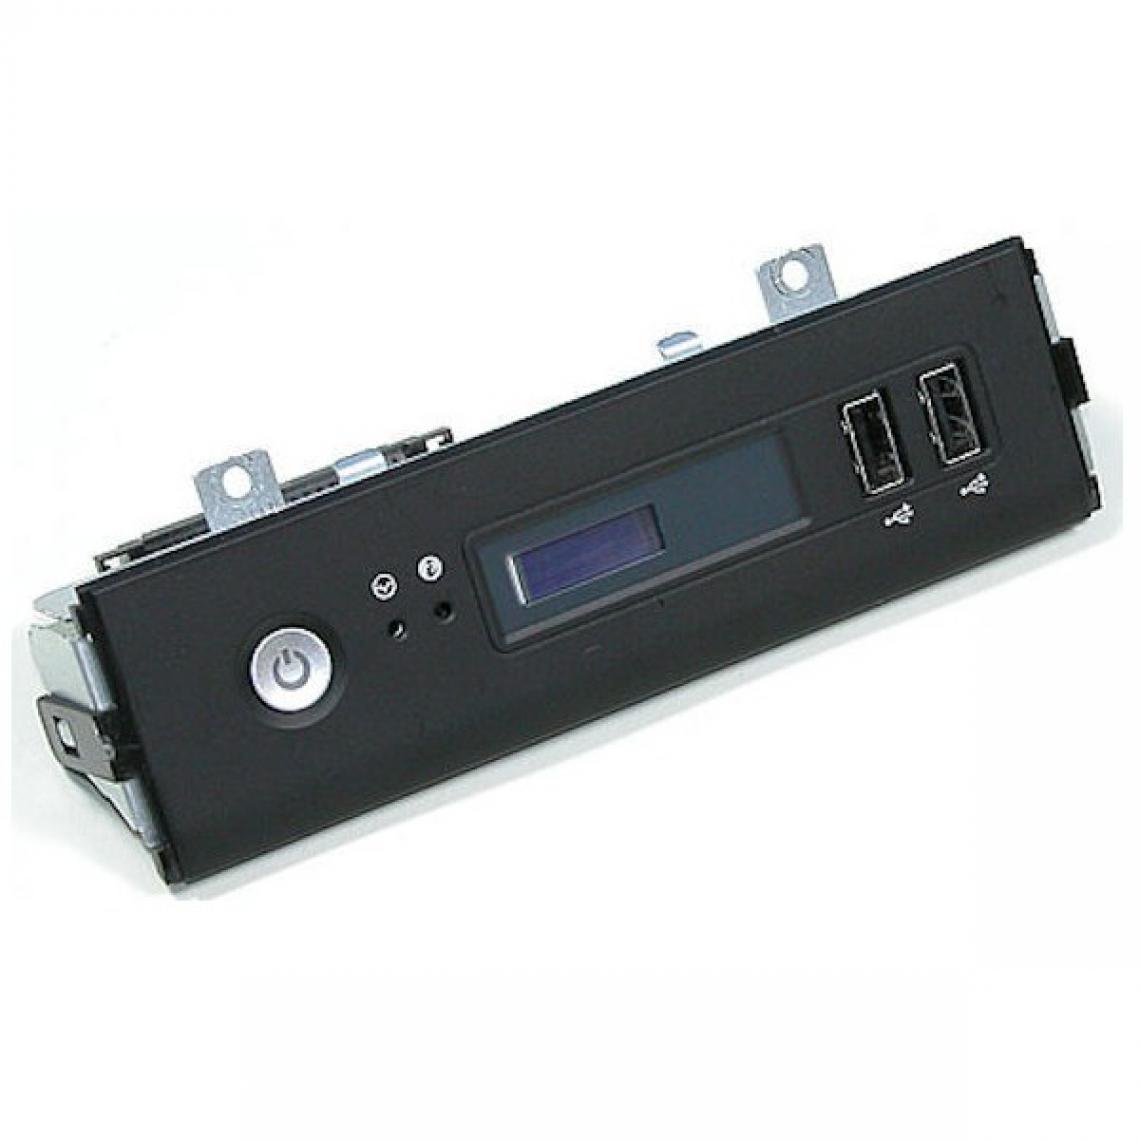 Dell - Dell PowerEdge T300 Front Panel LCD 0RW146 0KP013 USB Power Button + câble YU333 - Boitier PC